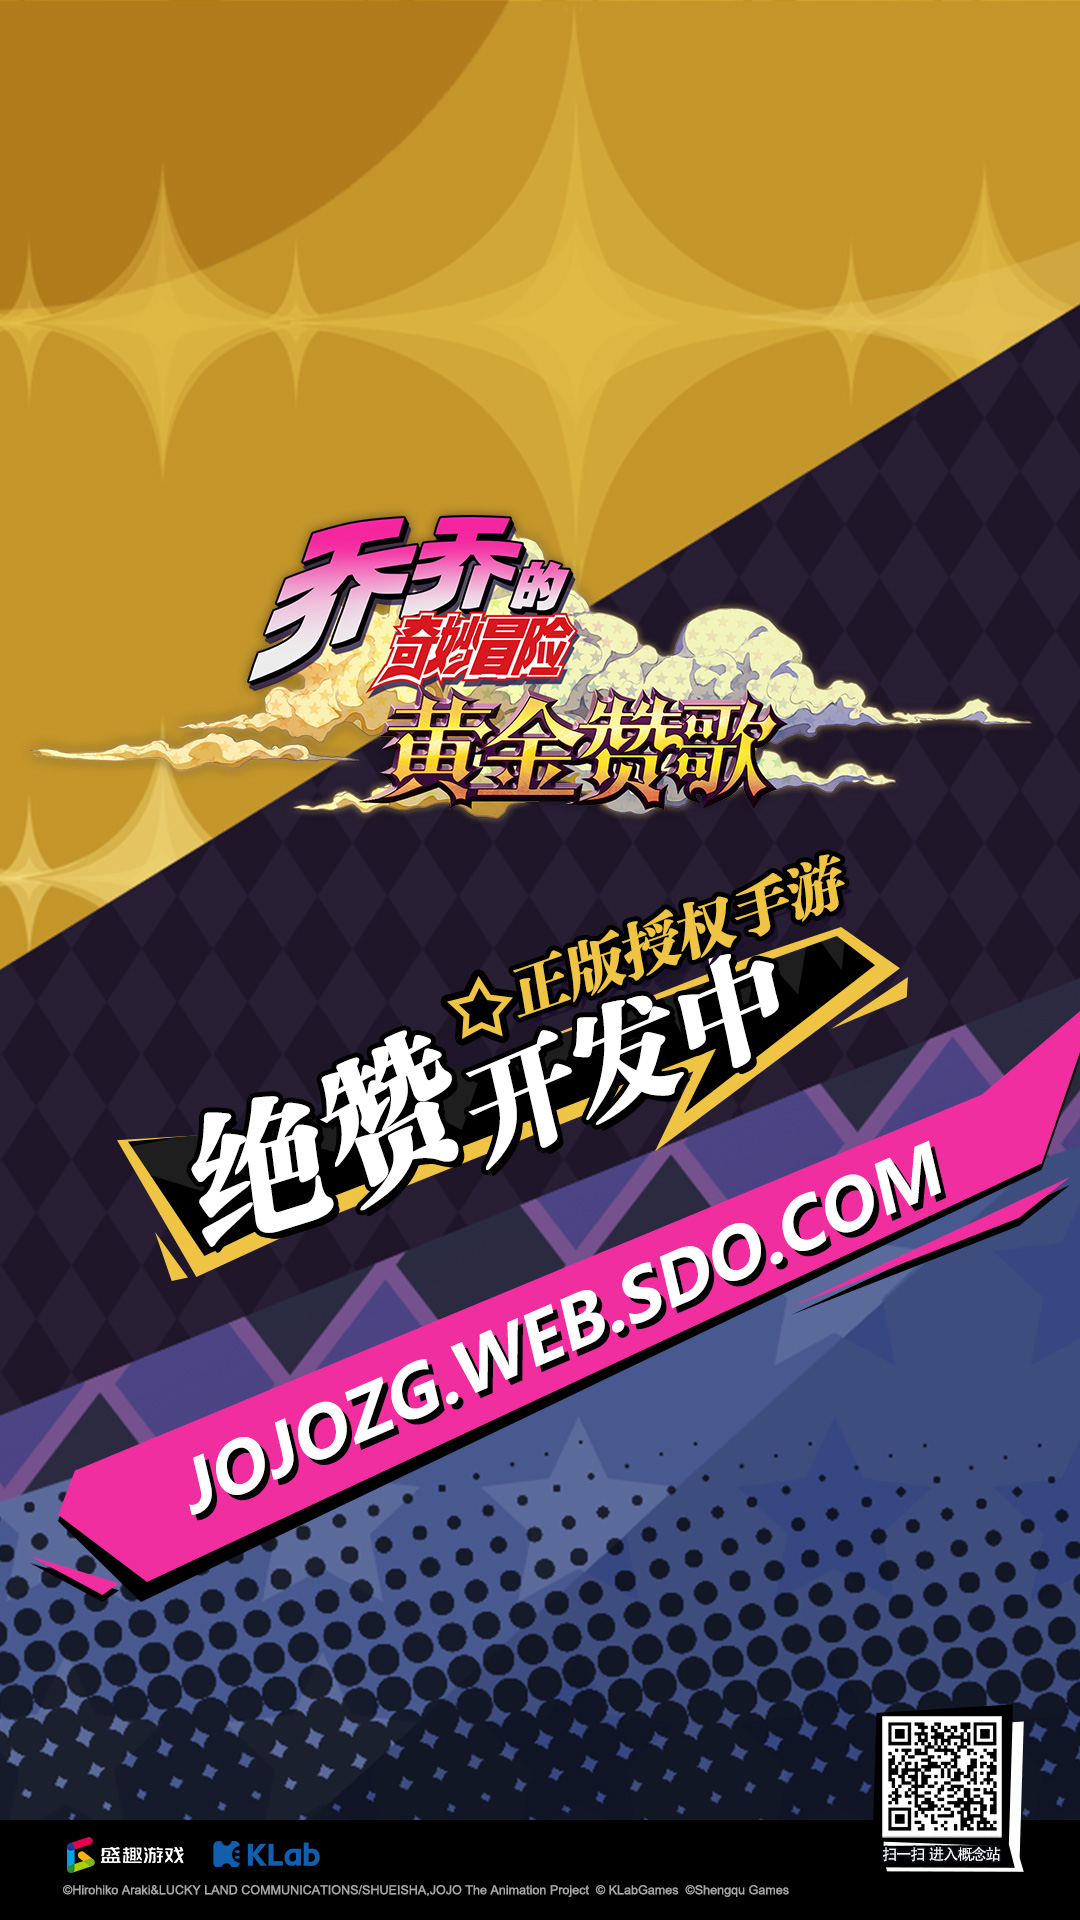 Jojo S Bizarre Adventure Mobile Game Teaser Website Opens In Simplified And Traditional Chinese Exhibition At Comicup27 In Shanghai News Klab Inc